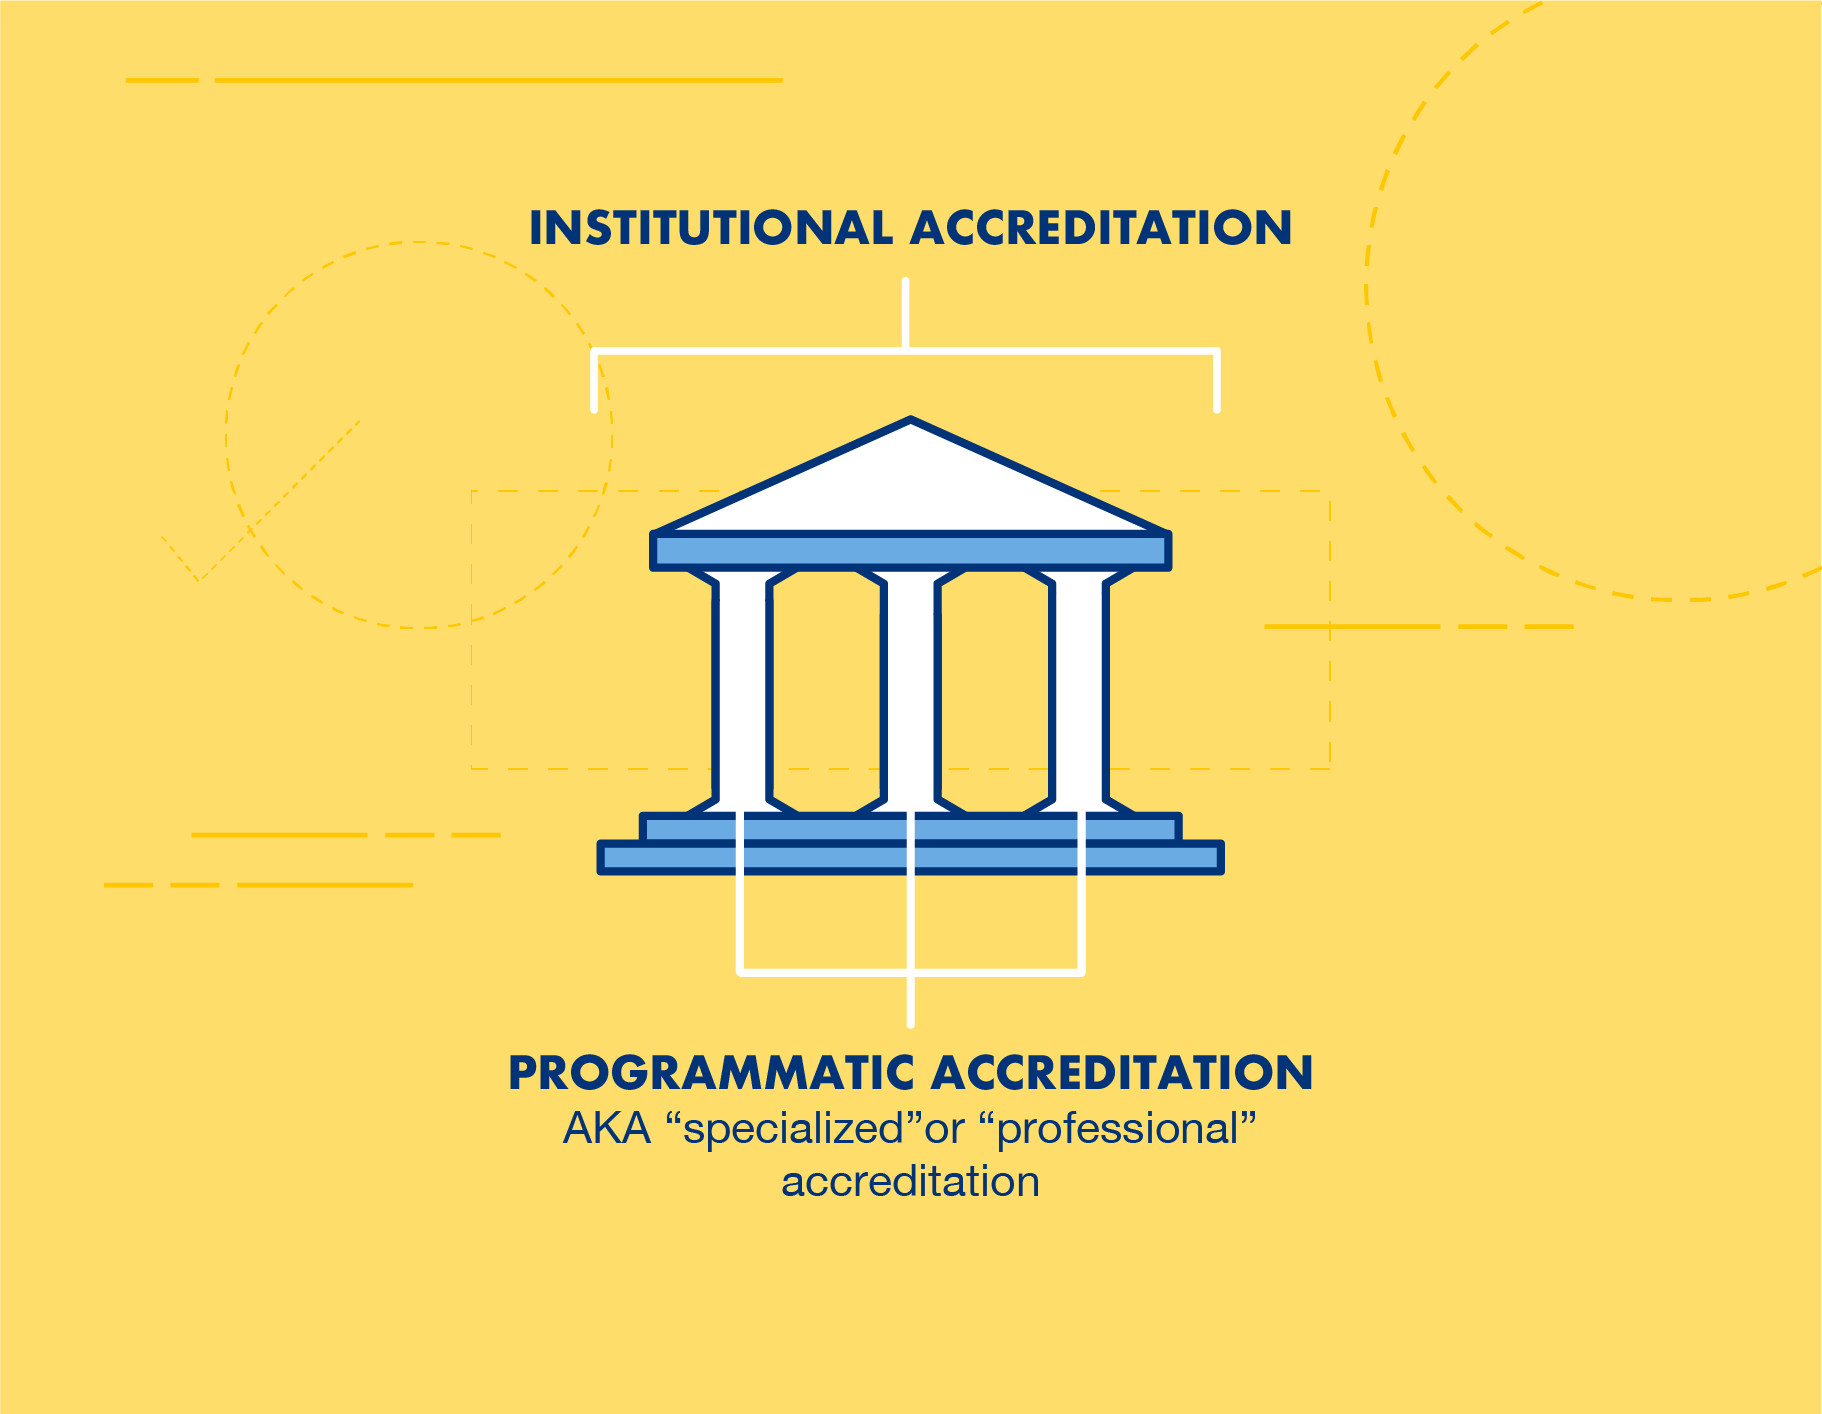 Difference between institutional accreditation and programmatic accreditation